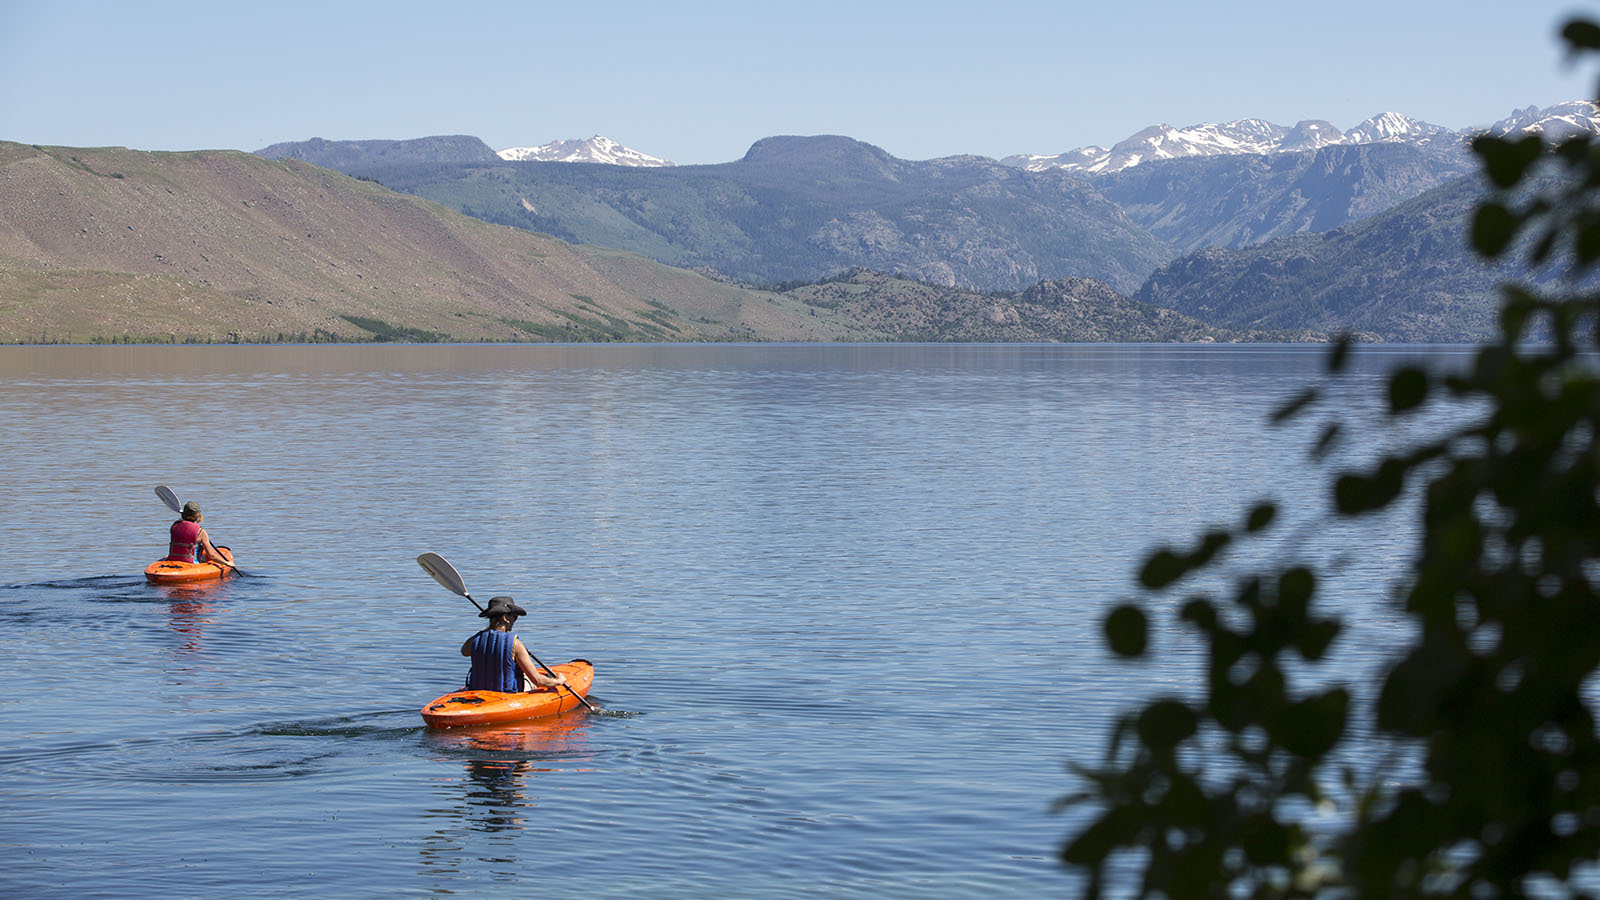 Two kayakers on the lake with mountains in the background